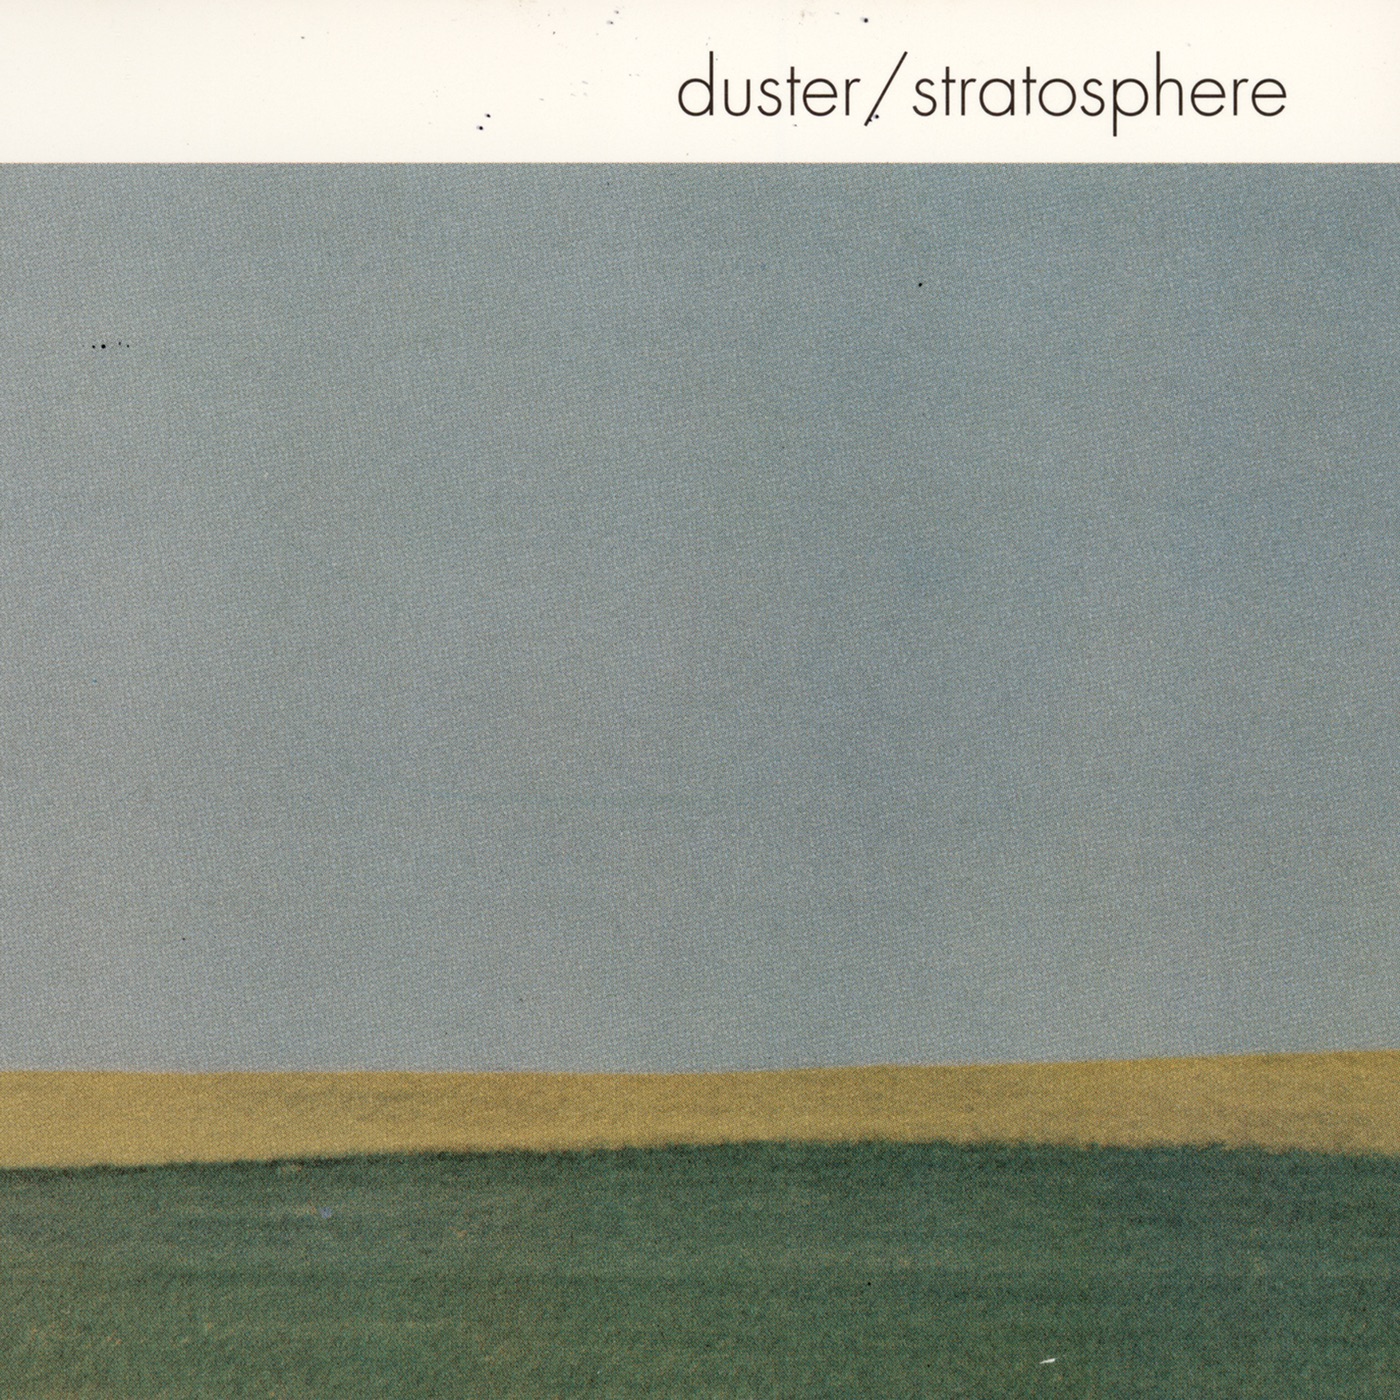 Stratosphere by Duster